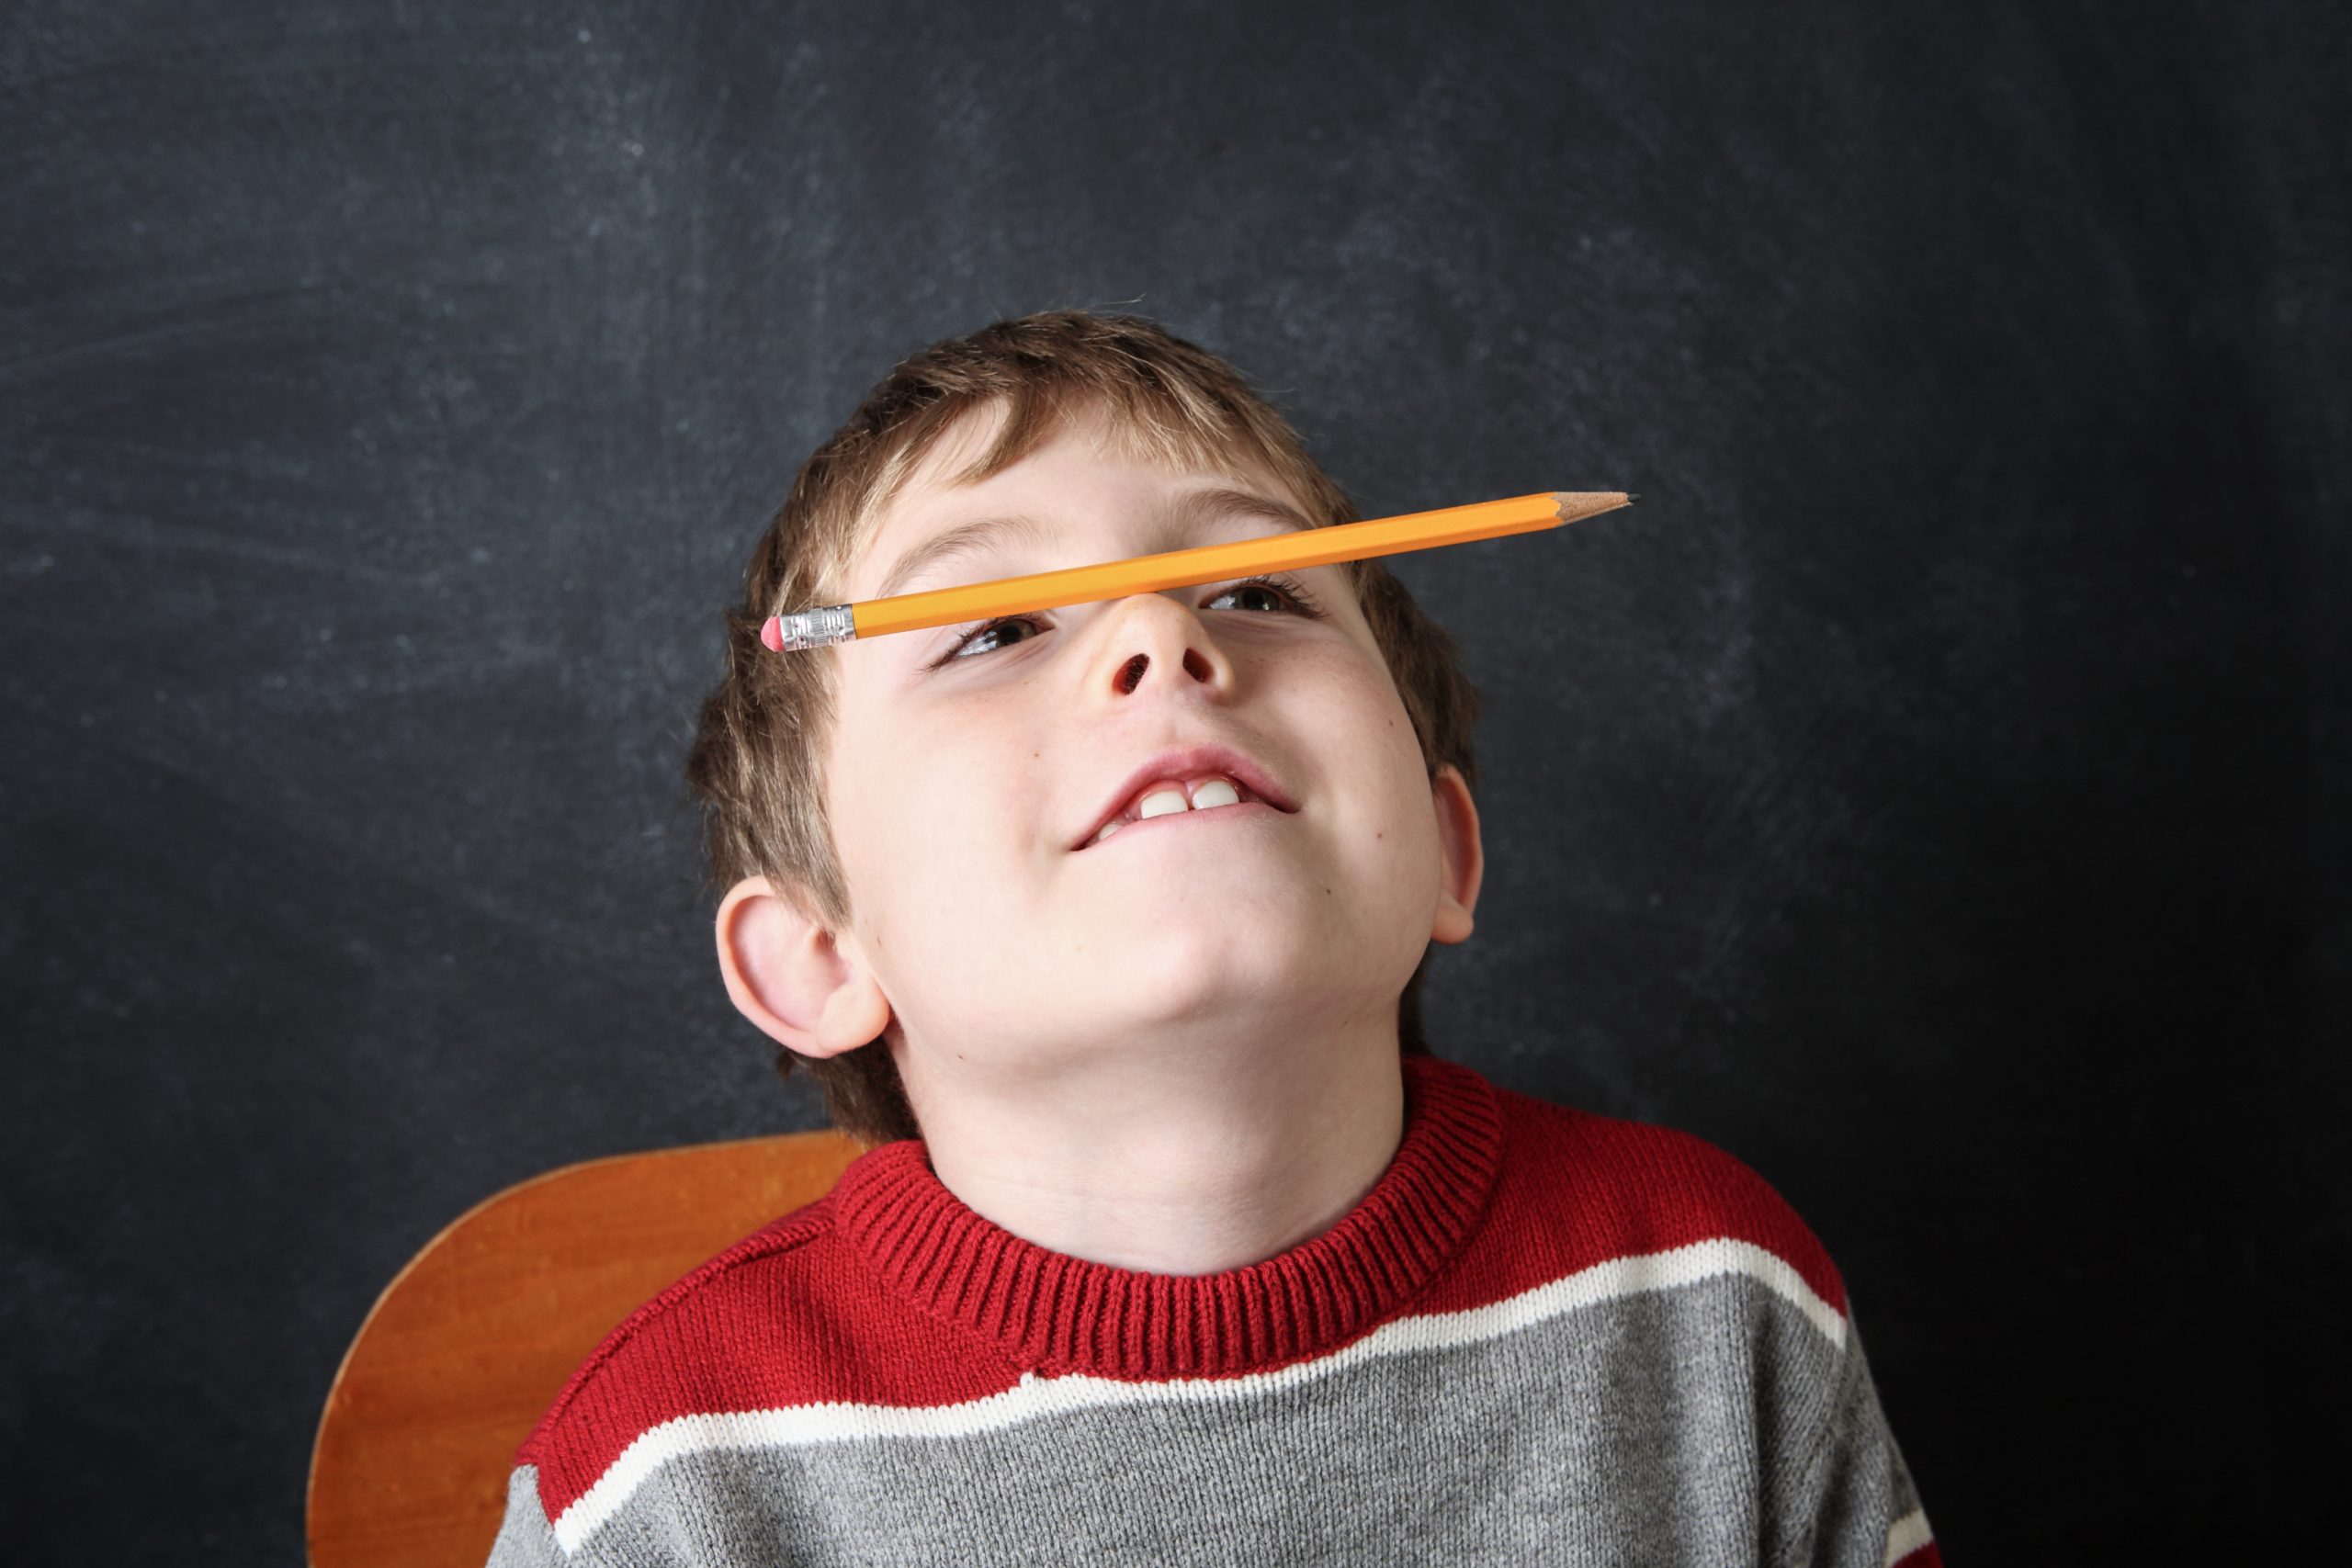 What is inattentive ADHD?